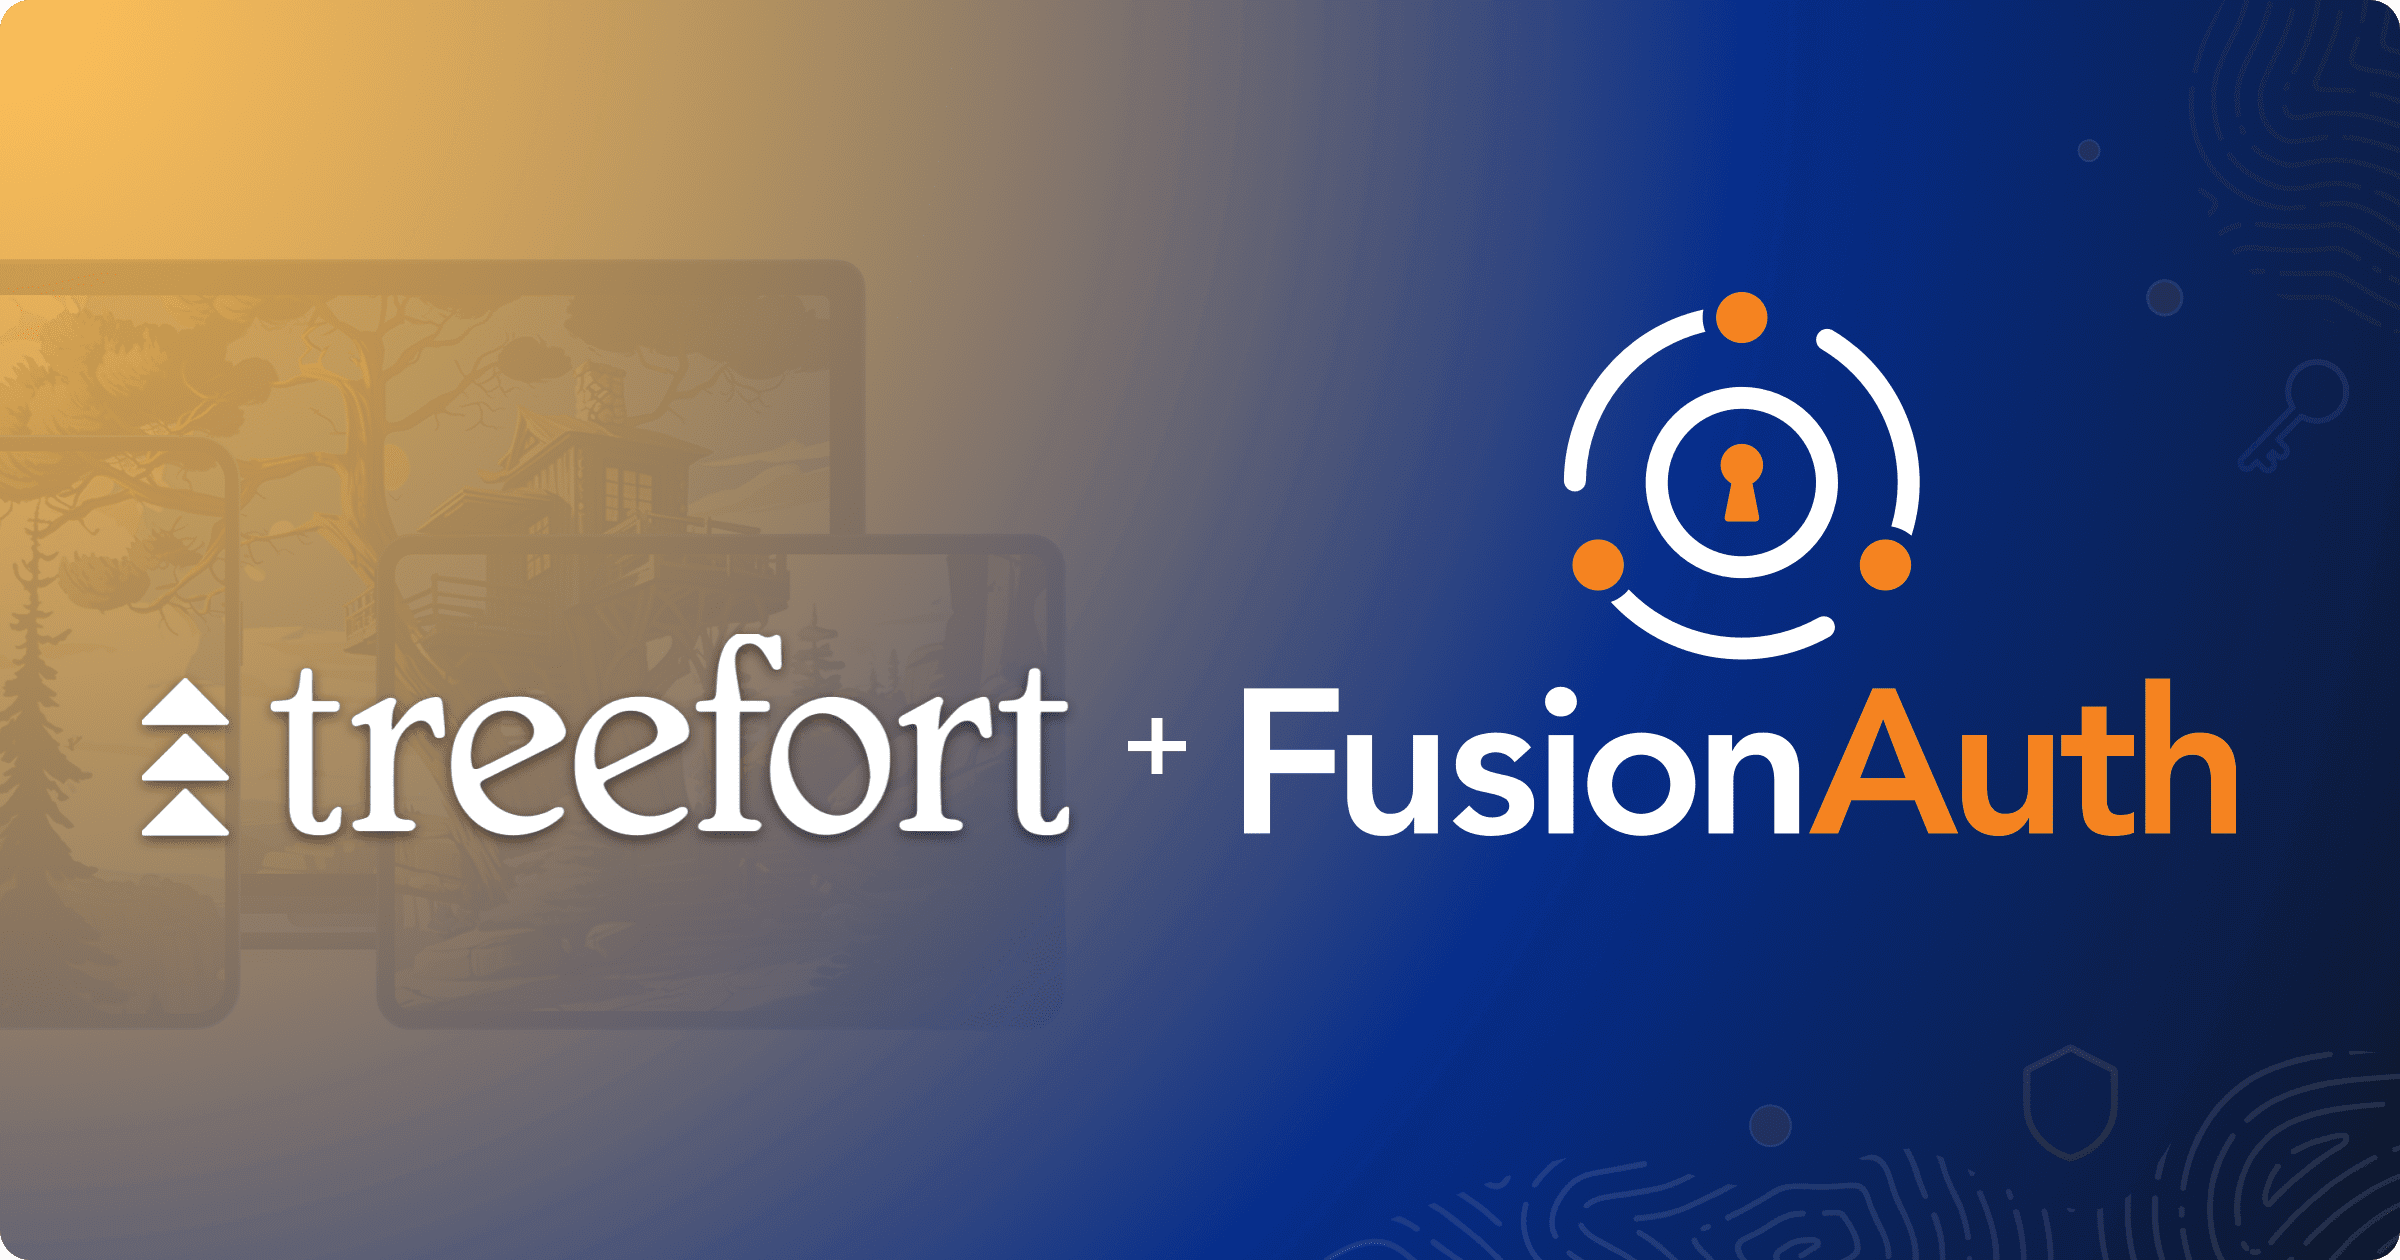 How Treefort Systems Uses FusionAuth to Power Private-Label Media Streaming for Thousands